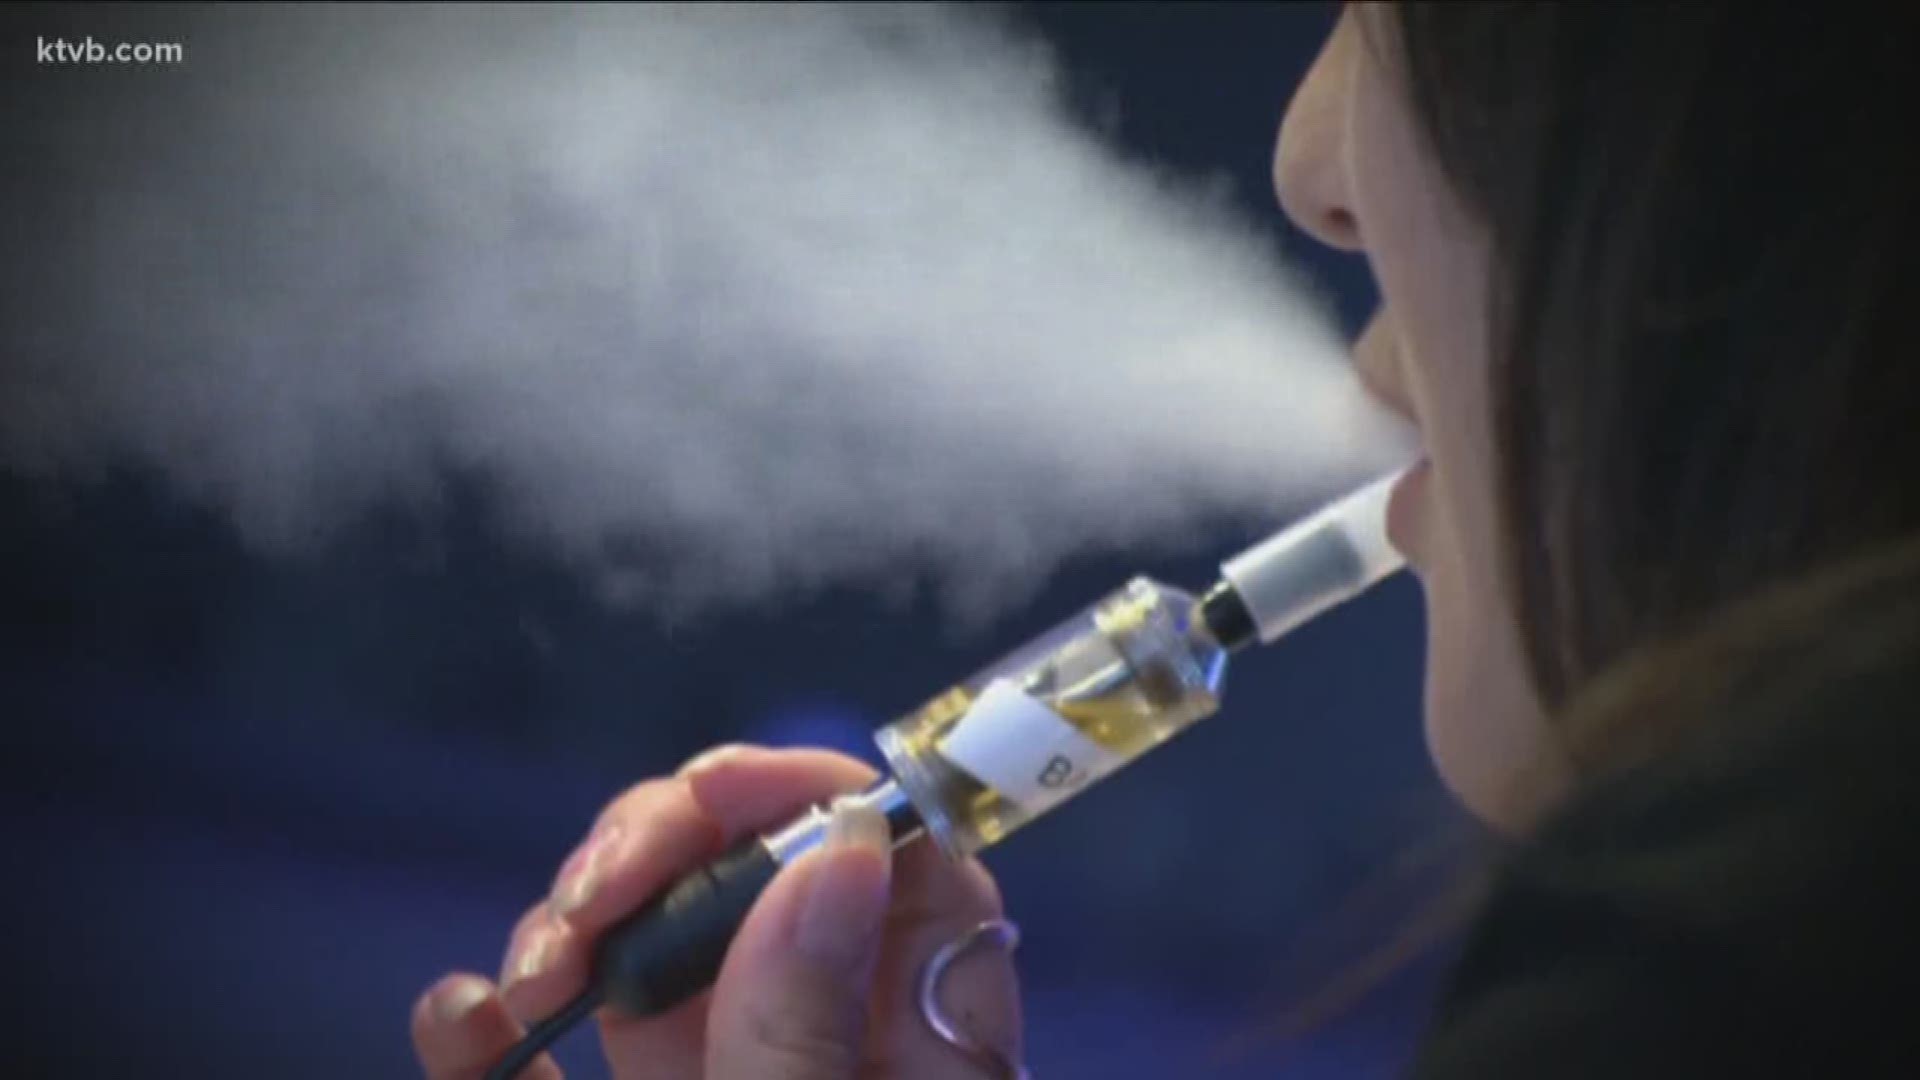 What are local school districts doing to combat vaping?